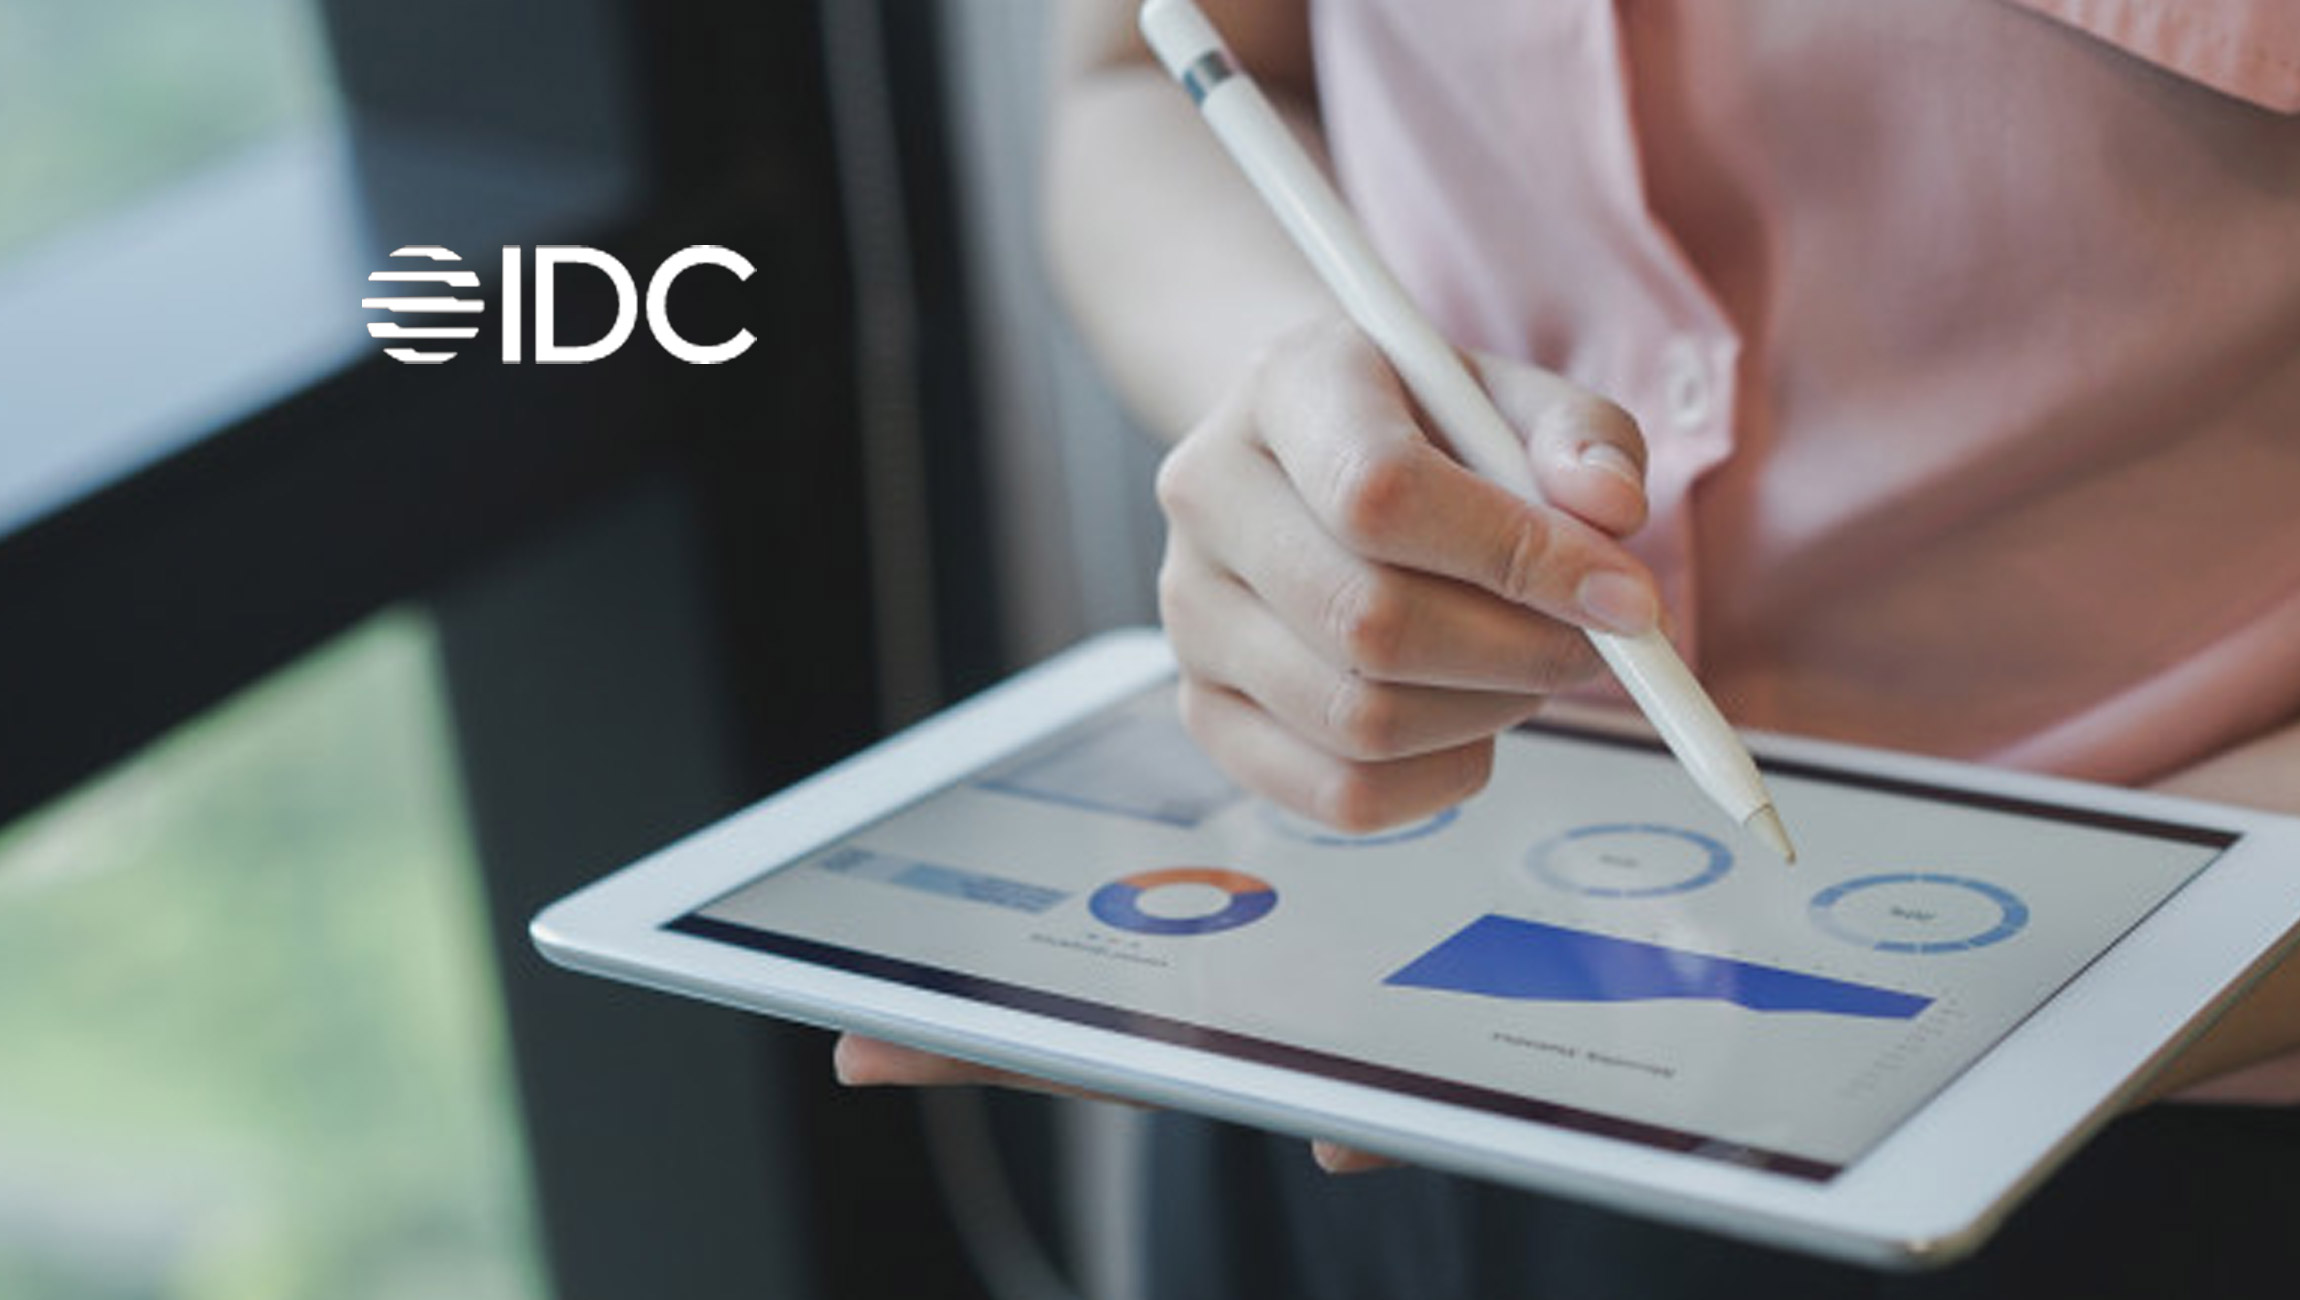 IDC Forecasts Steady Growth for Enterprise Applications through 2026 in Support of Digital Business Objectives